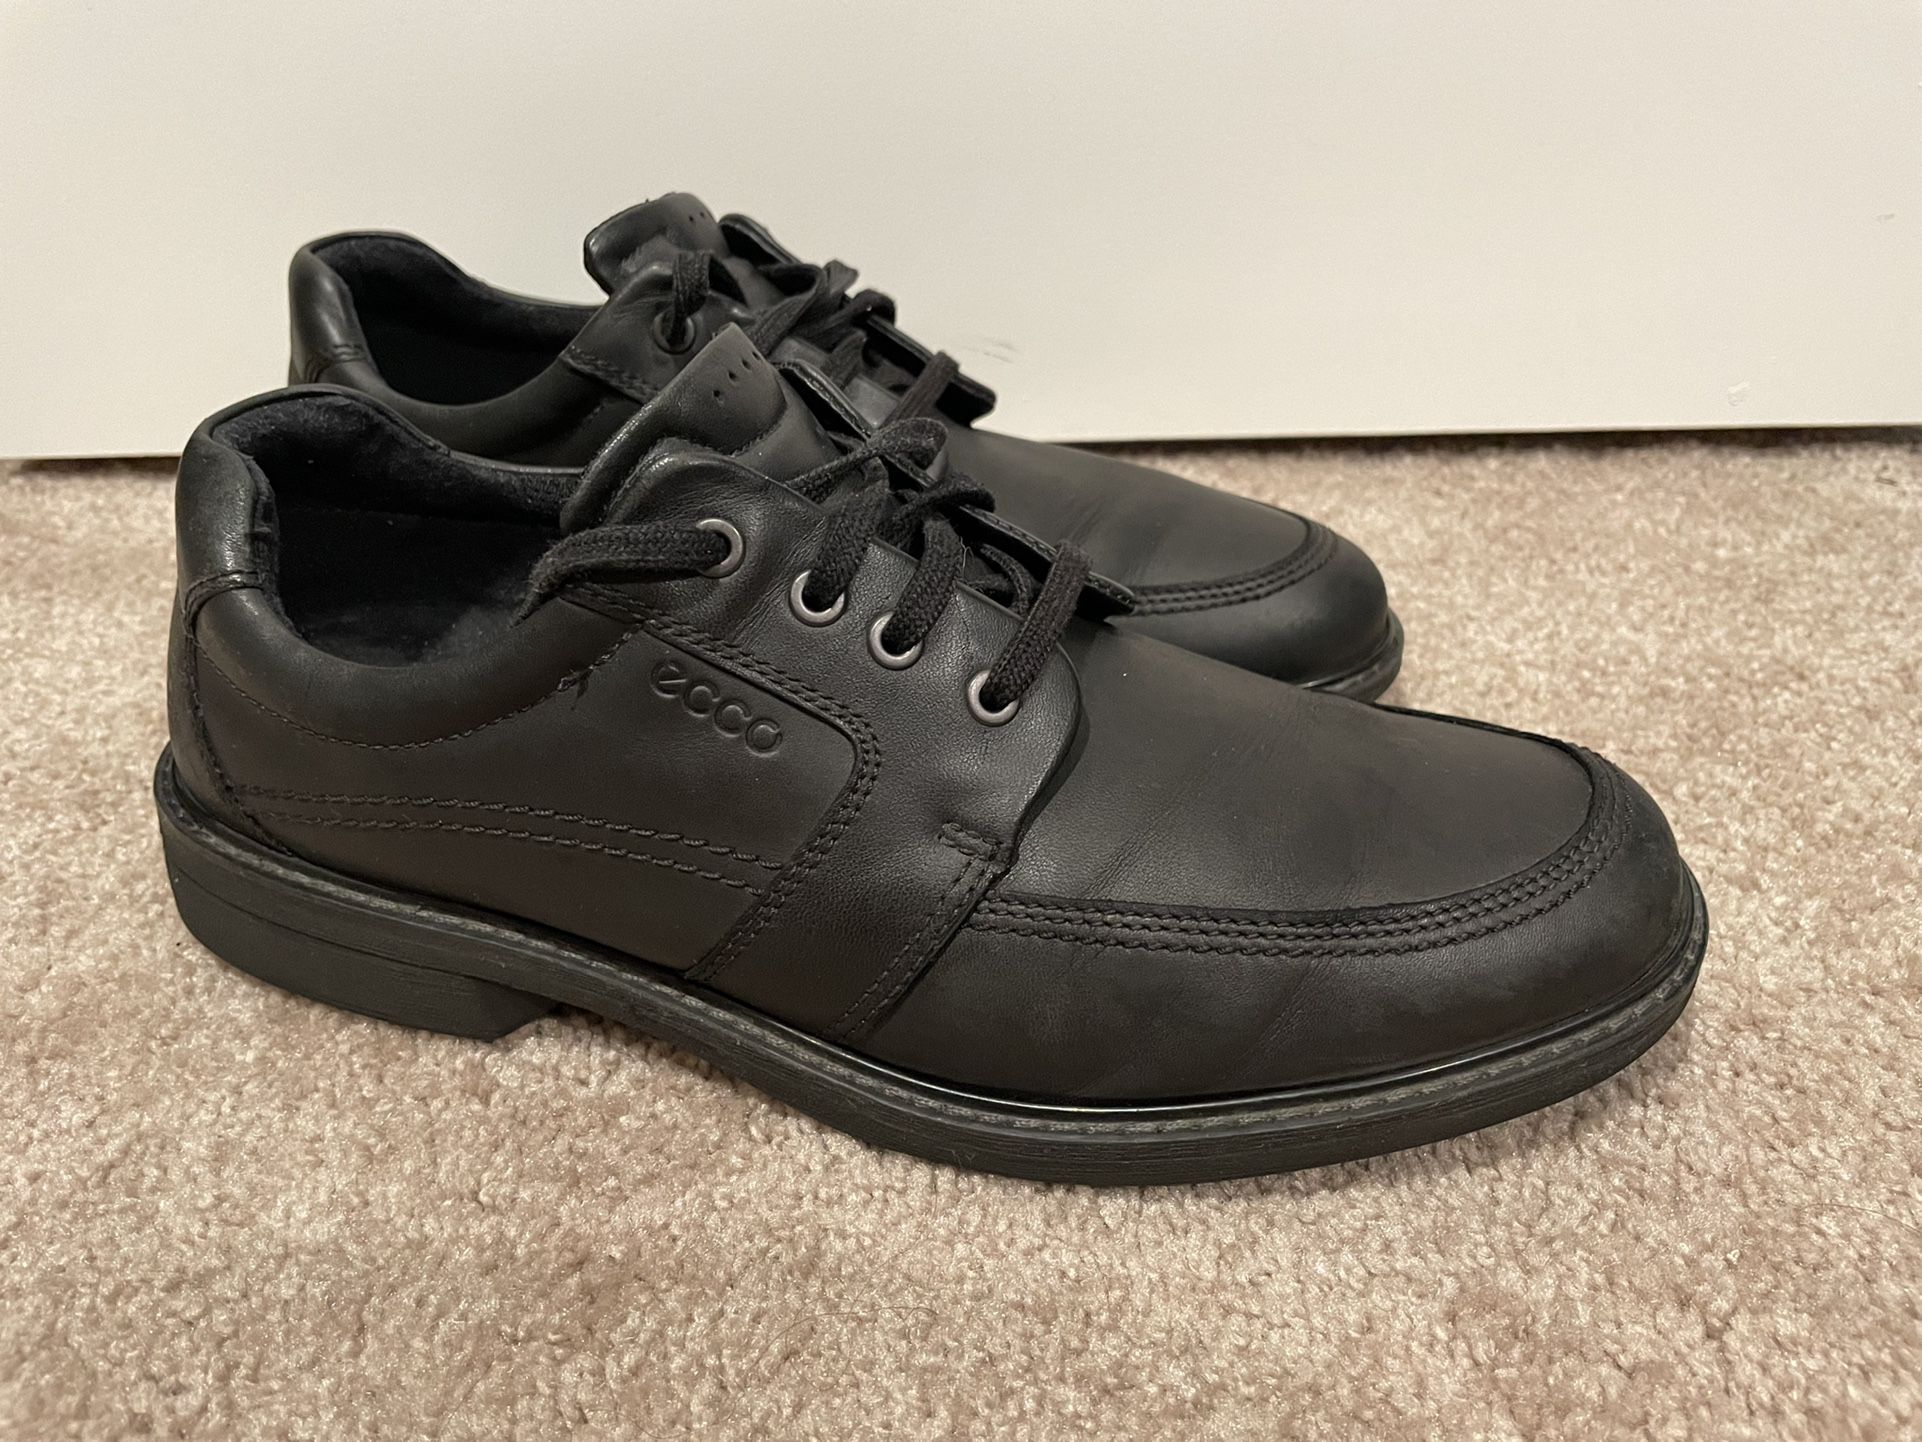 Ecco Men Black Leather Shoes for Sale in Beaumont, CA - OfferUp